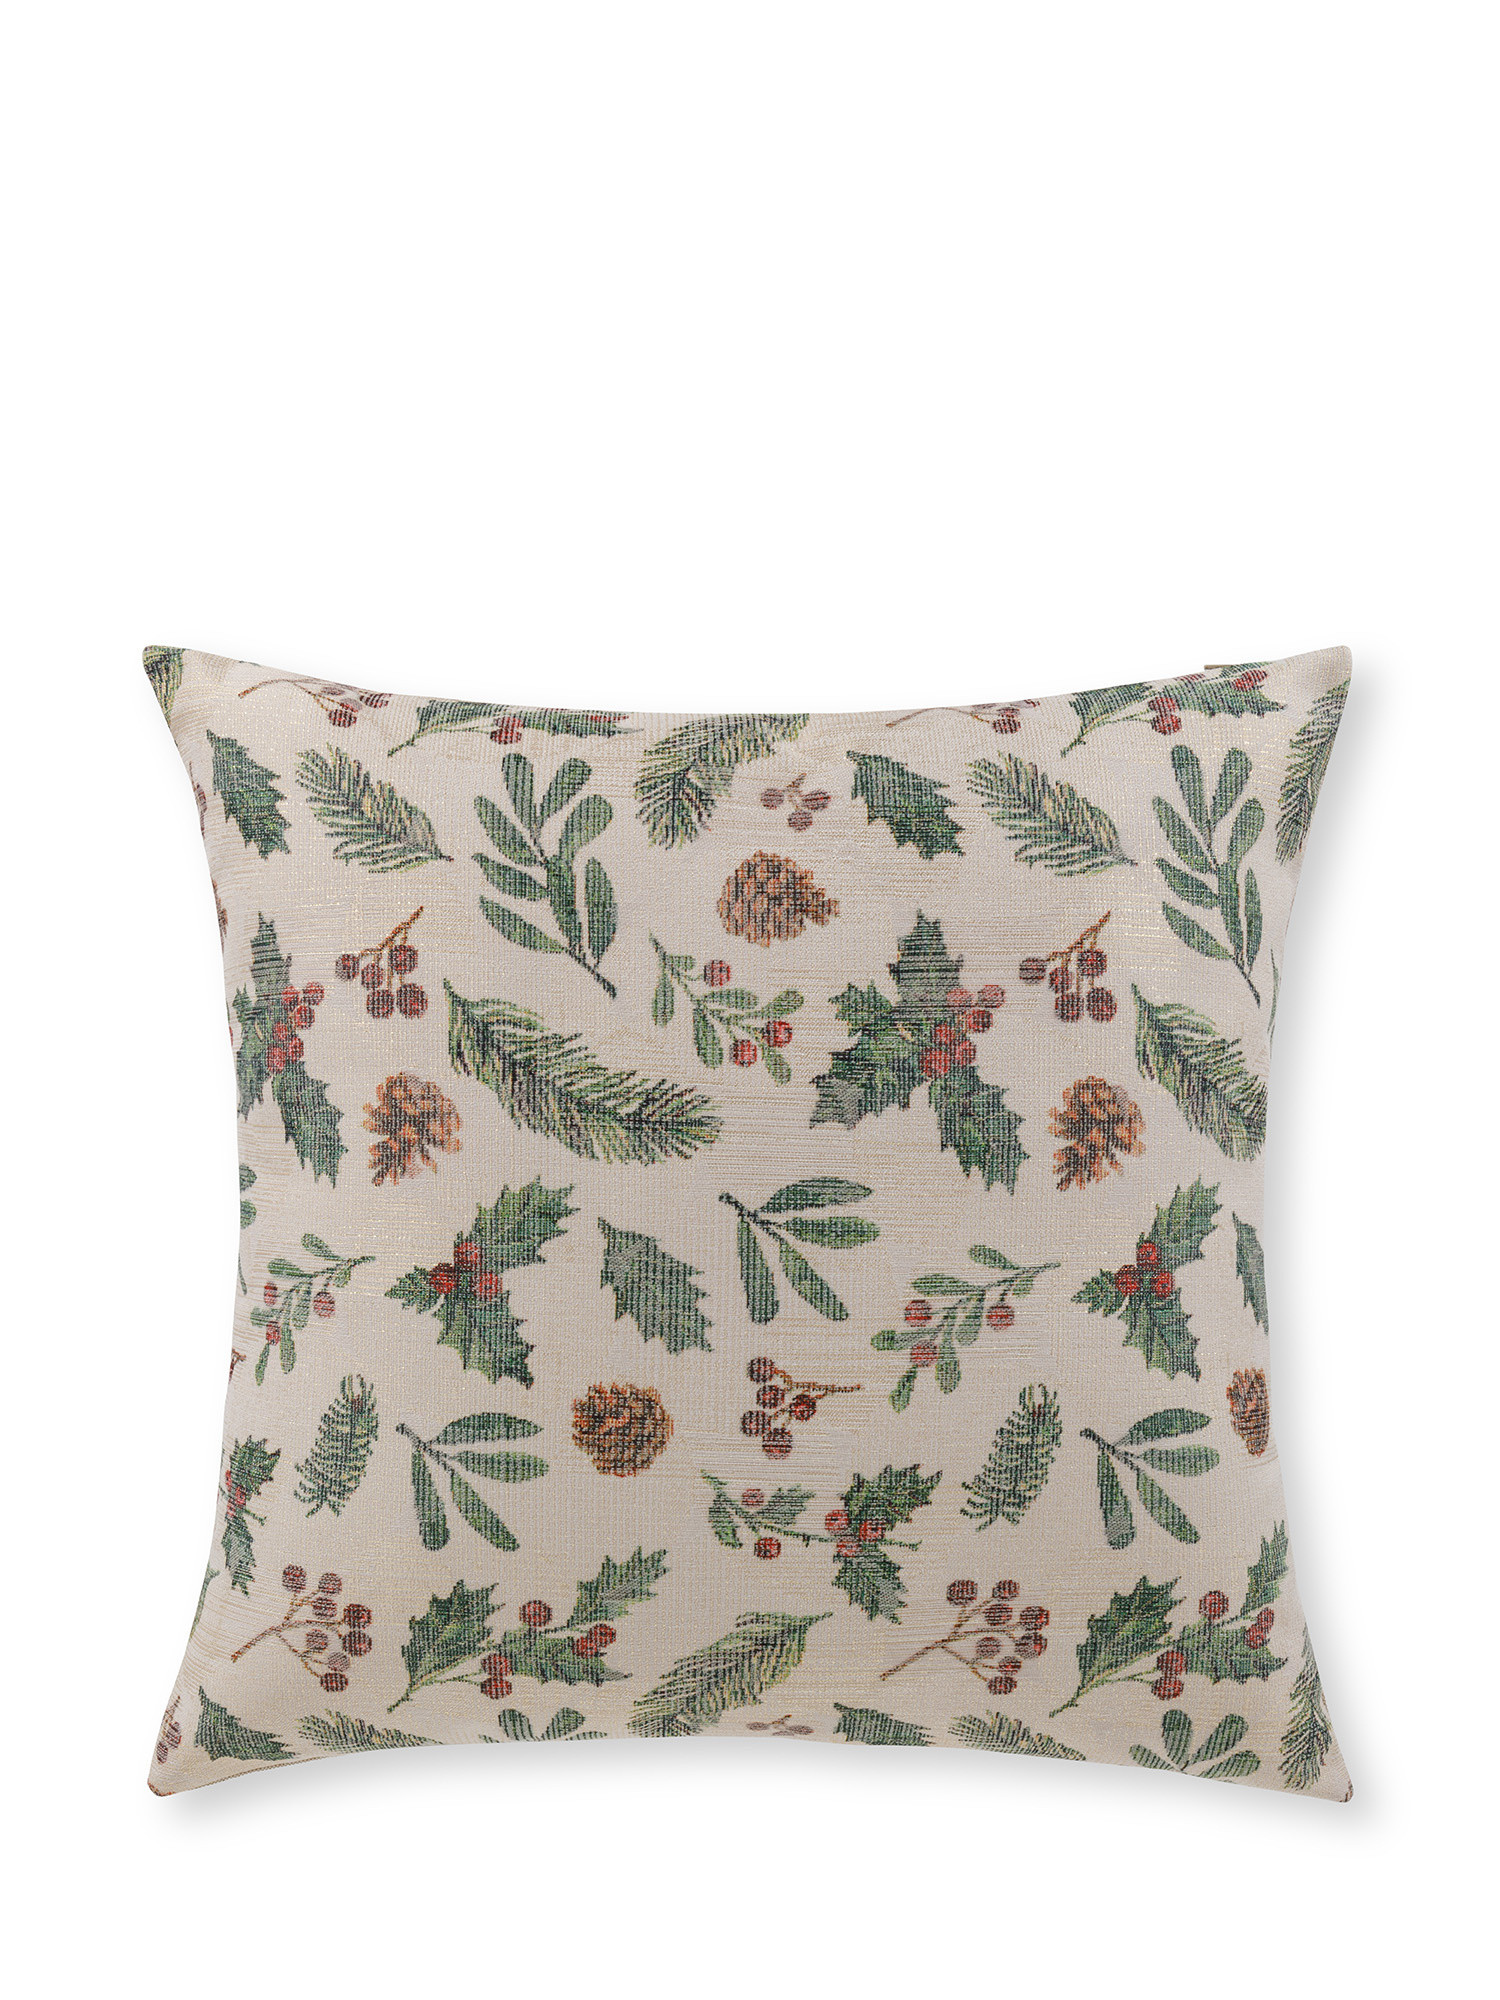 Cushion in lurex jacquard fabric with pine cones and leaves motif 45x45 cm, Multicolor, large image number 0